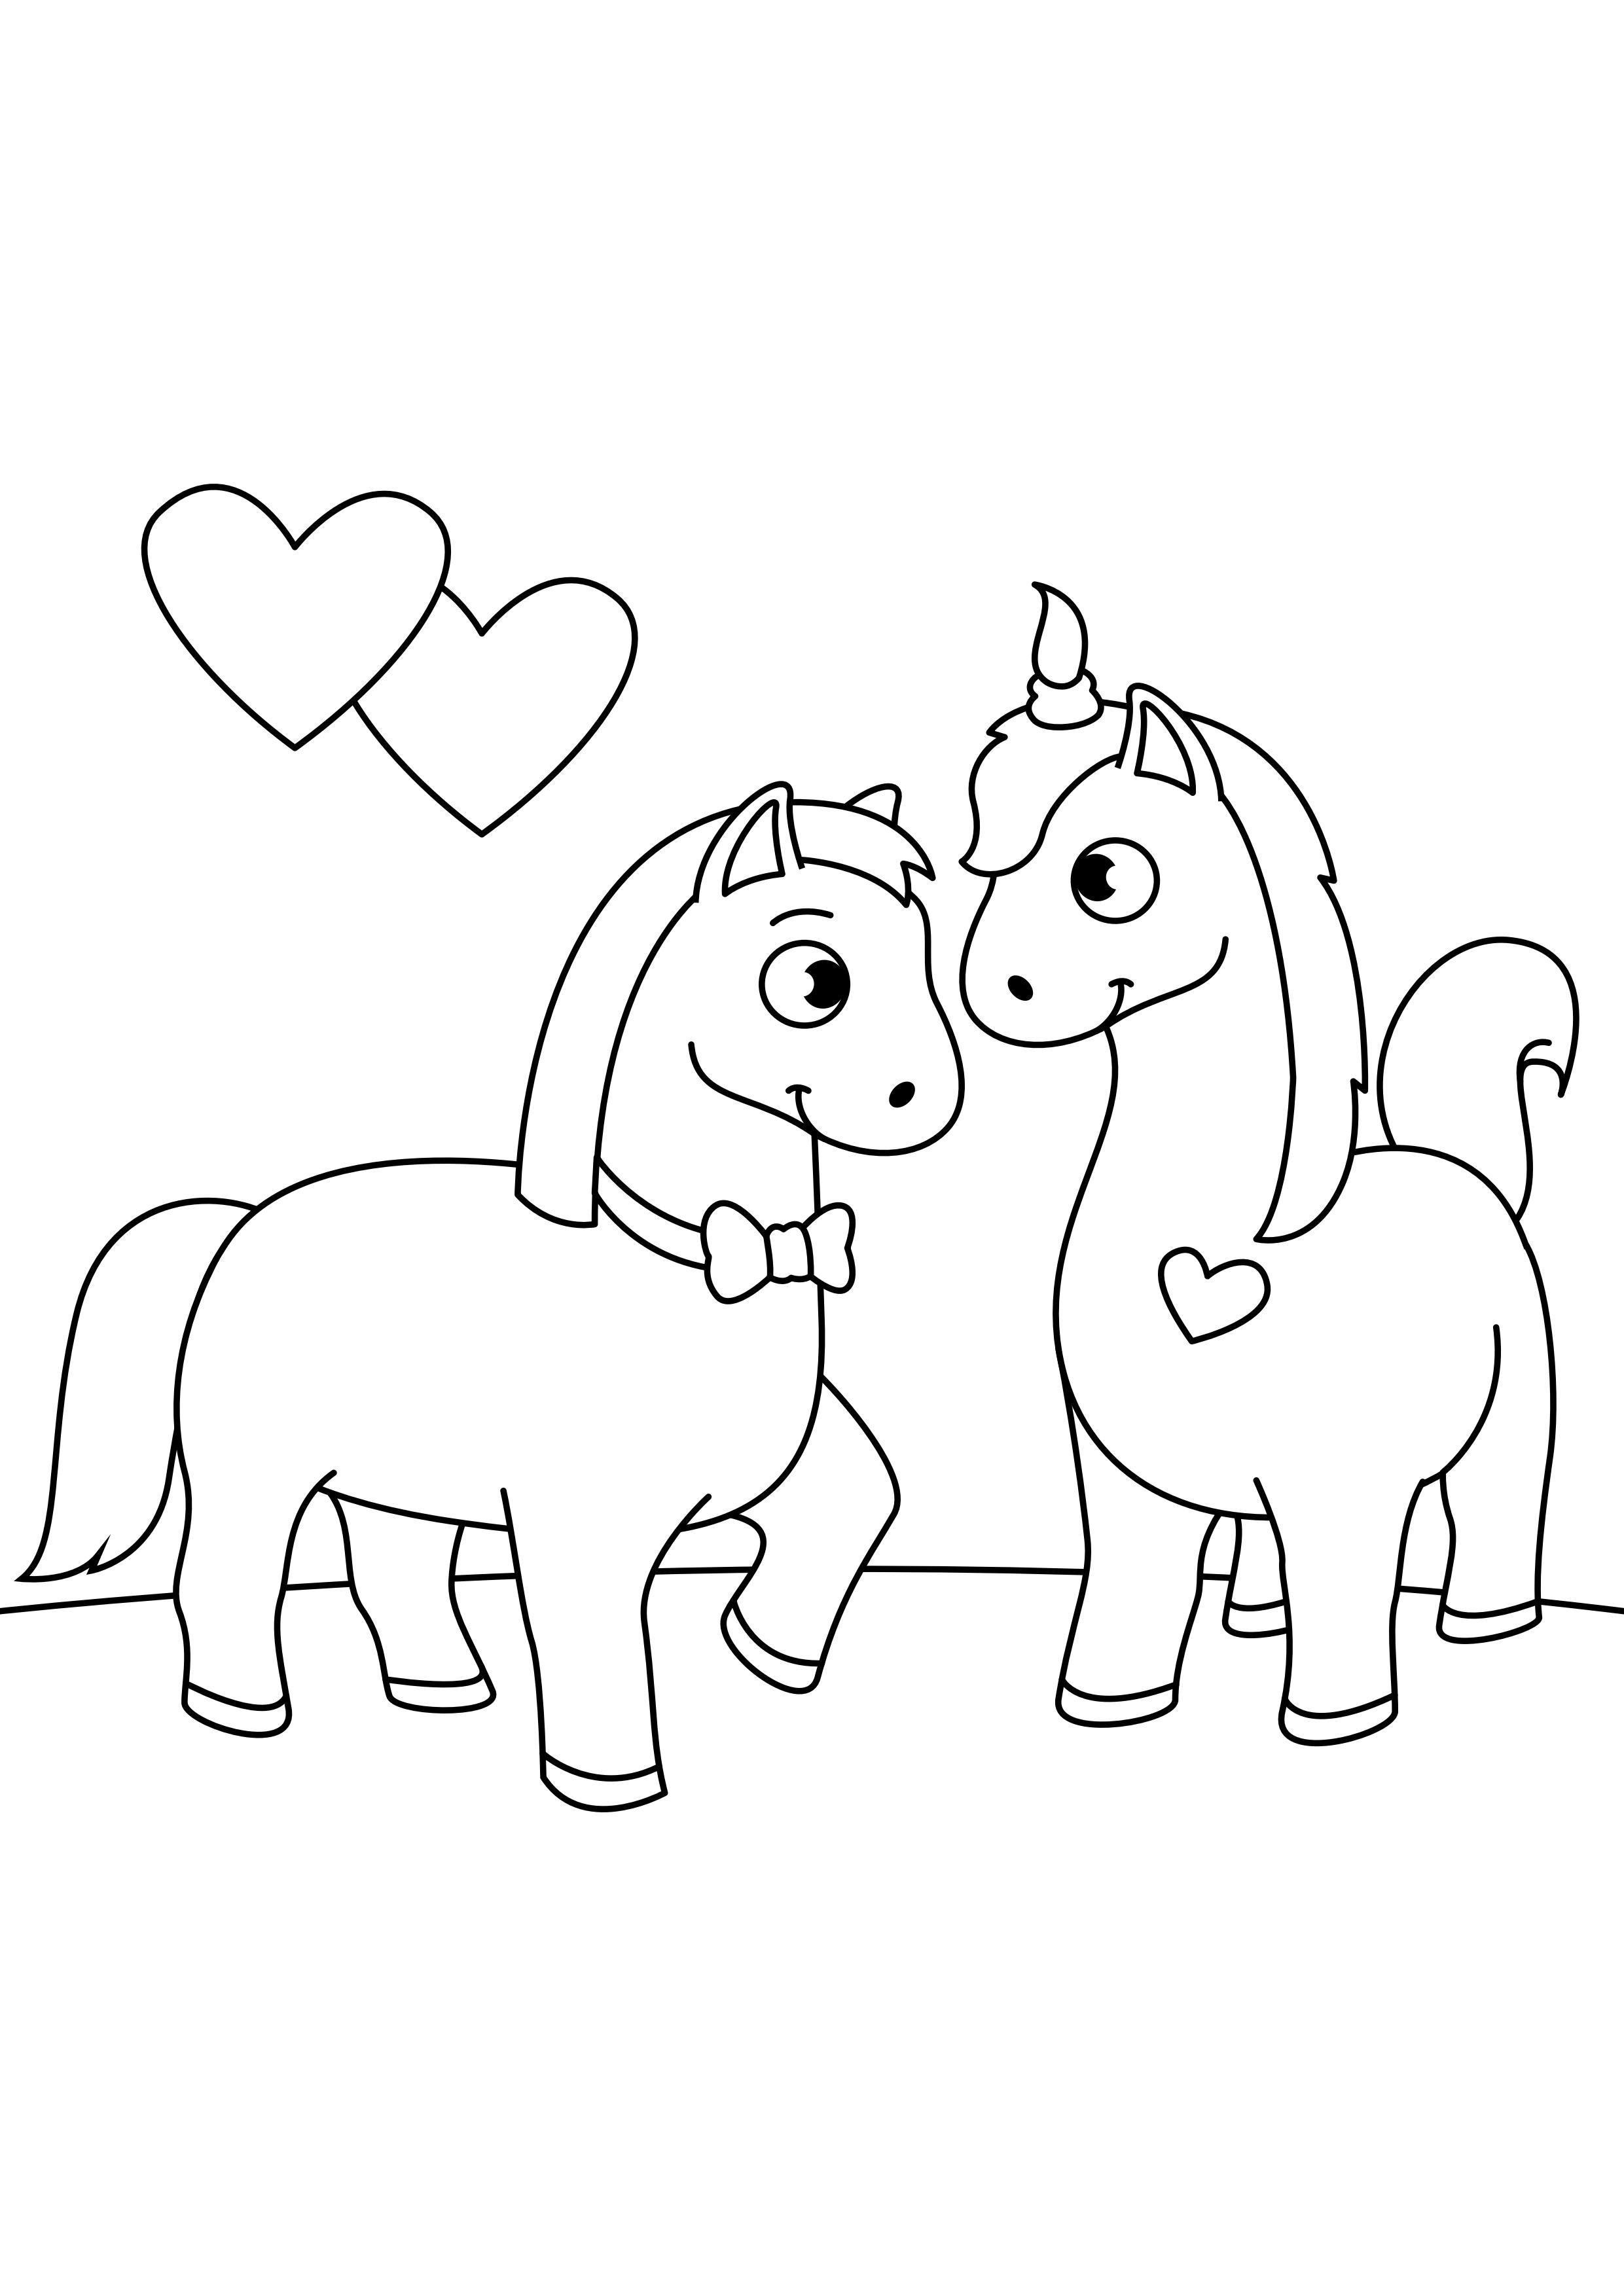 Coloring page horses in love